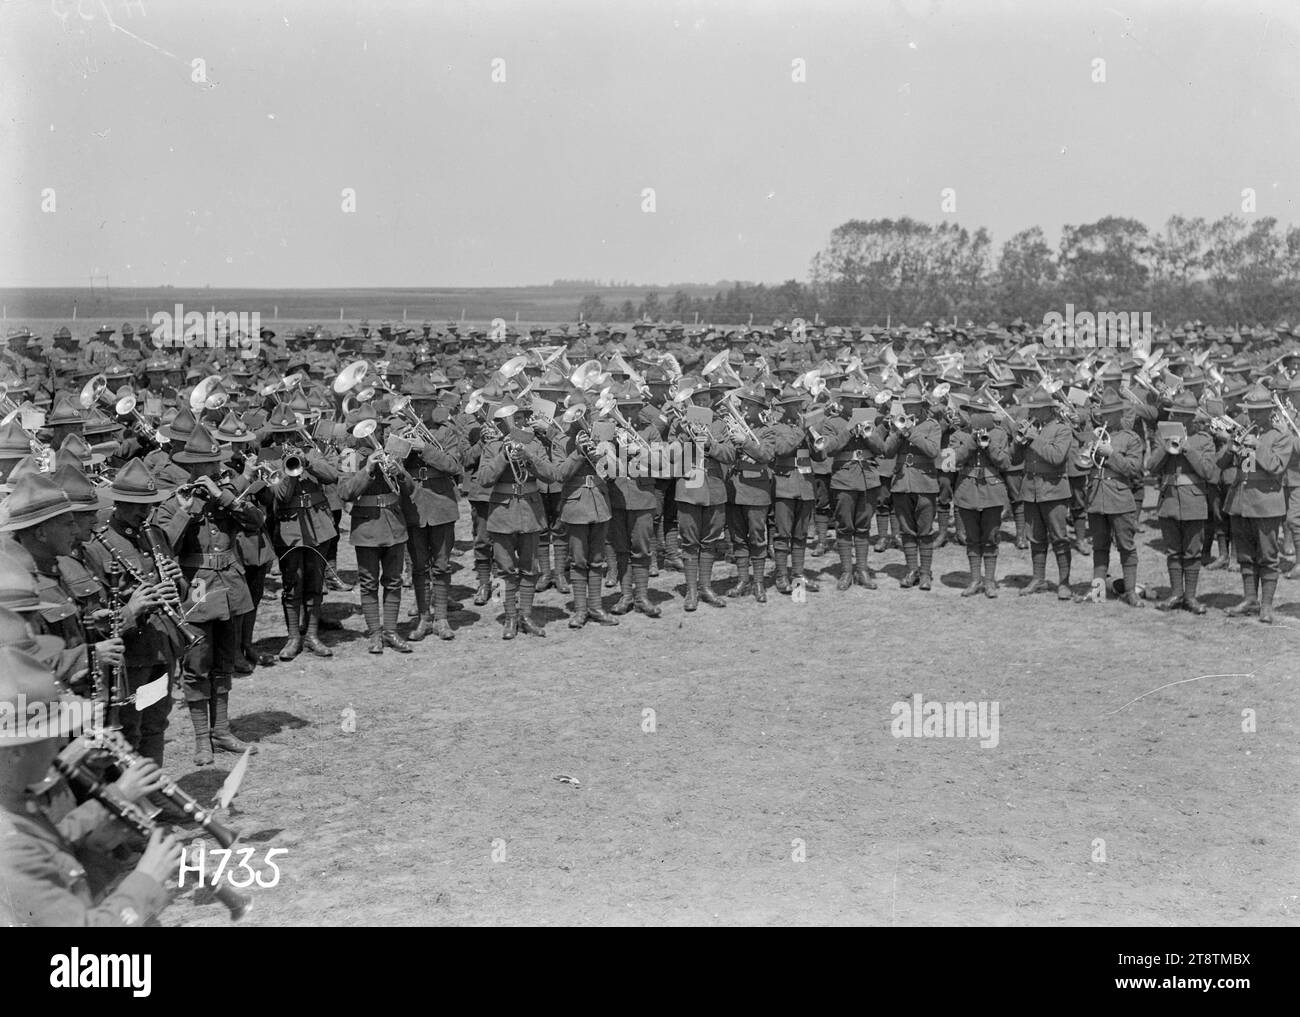 The massed bands playing at the New Zealand Divisional Band Contest, France, A front view of the massed bands playing at the conclusion of the New Zealand Divisional Band Contest in Authie, France, during World War I. Photograph taken 27 July 1918 Stock Photo